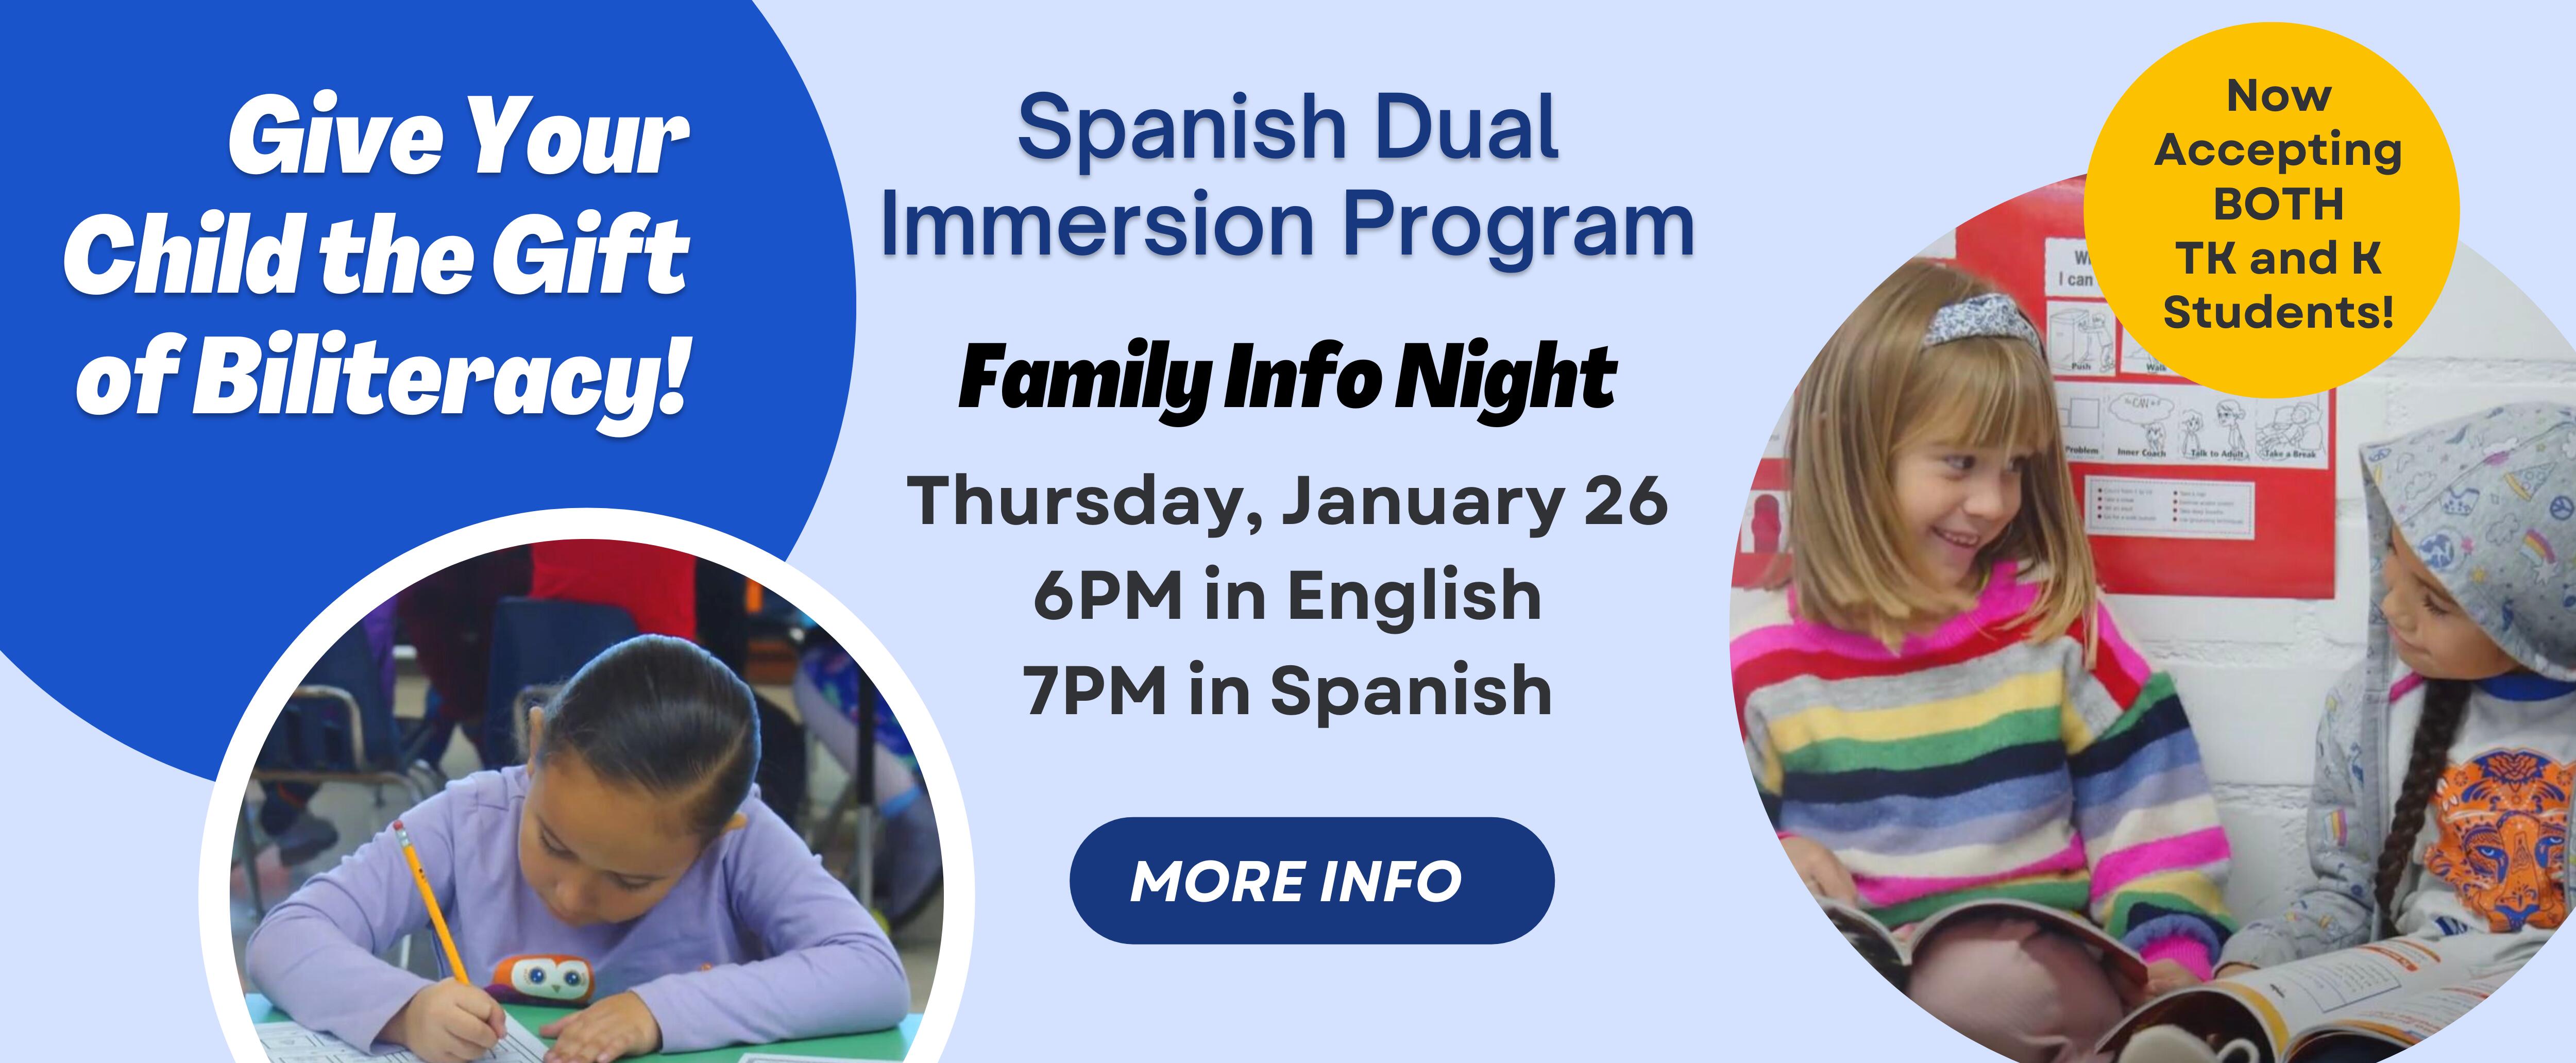 Dual Immersion Family Info Night Jan 26